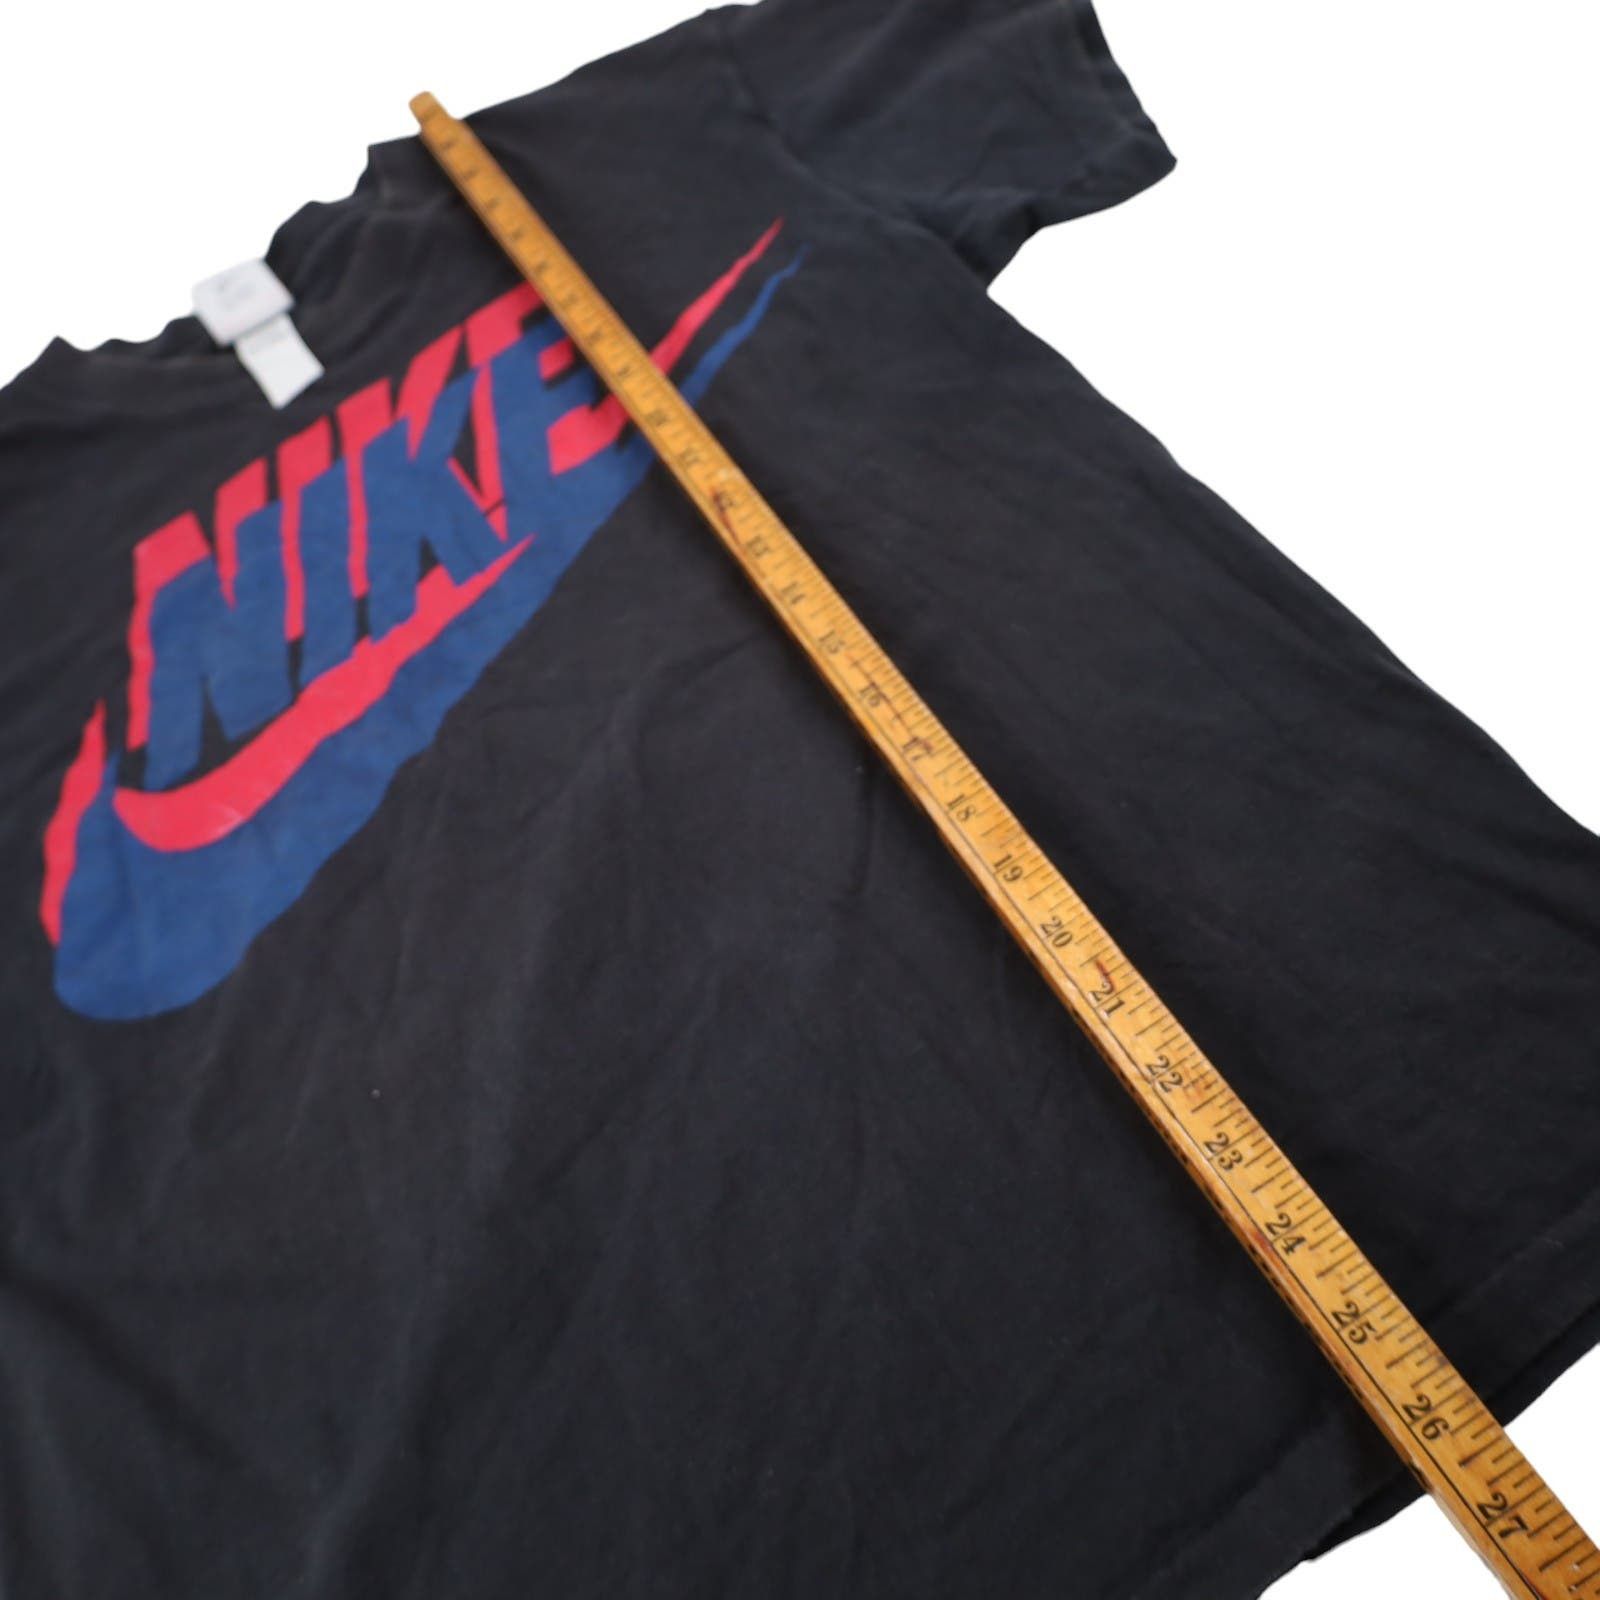 Nike Vintage 90s Nike Graphic Spellout T Shirt Size US L / EU 52-54 / 3 - 9 Preview